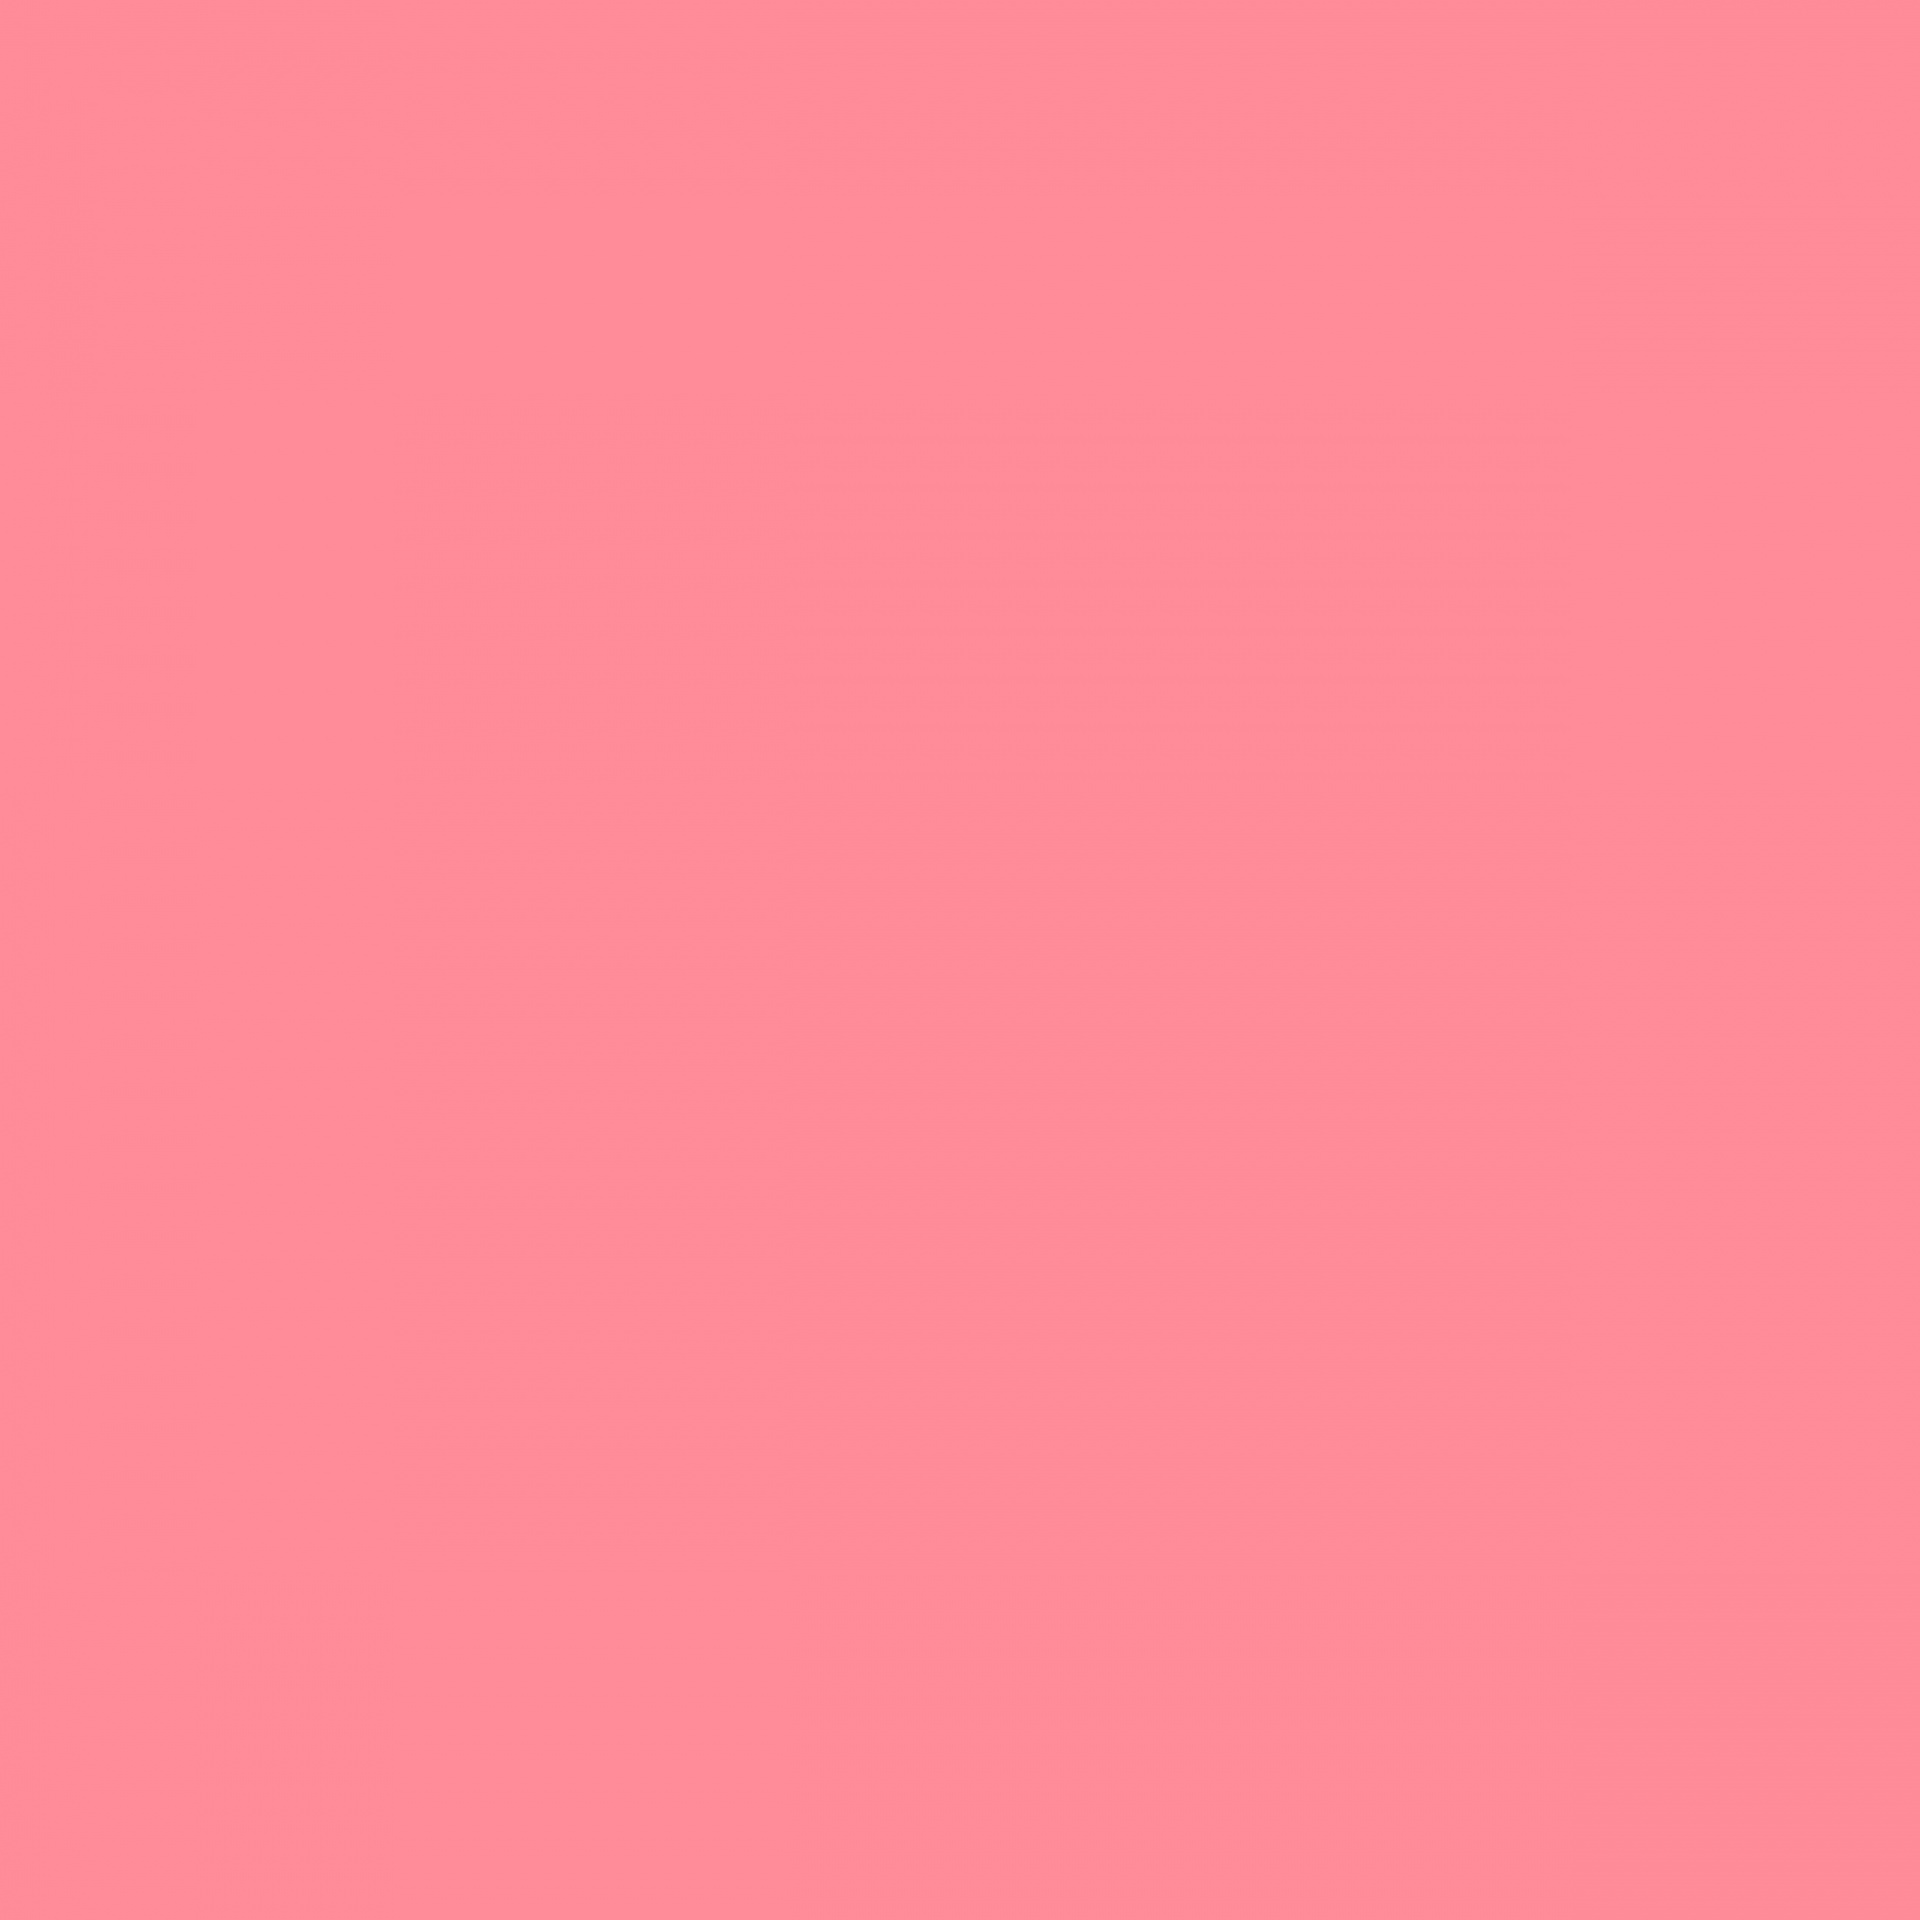 Coral Pink Background